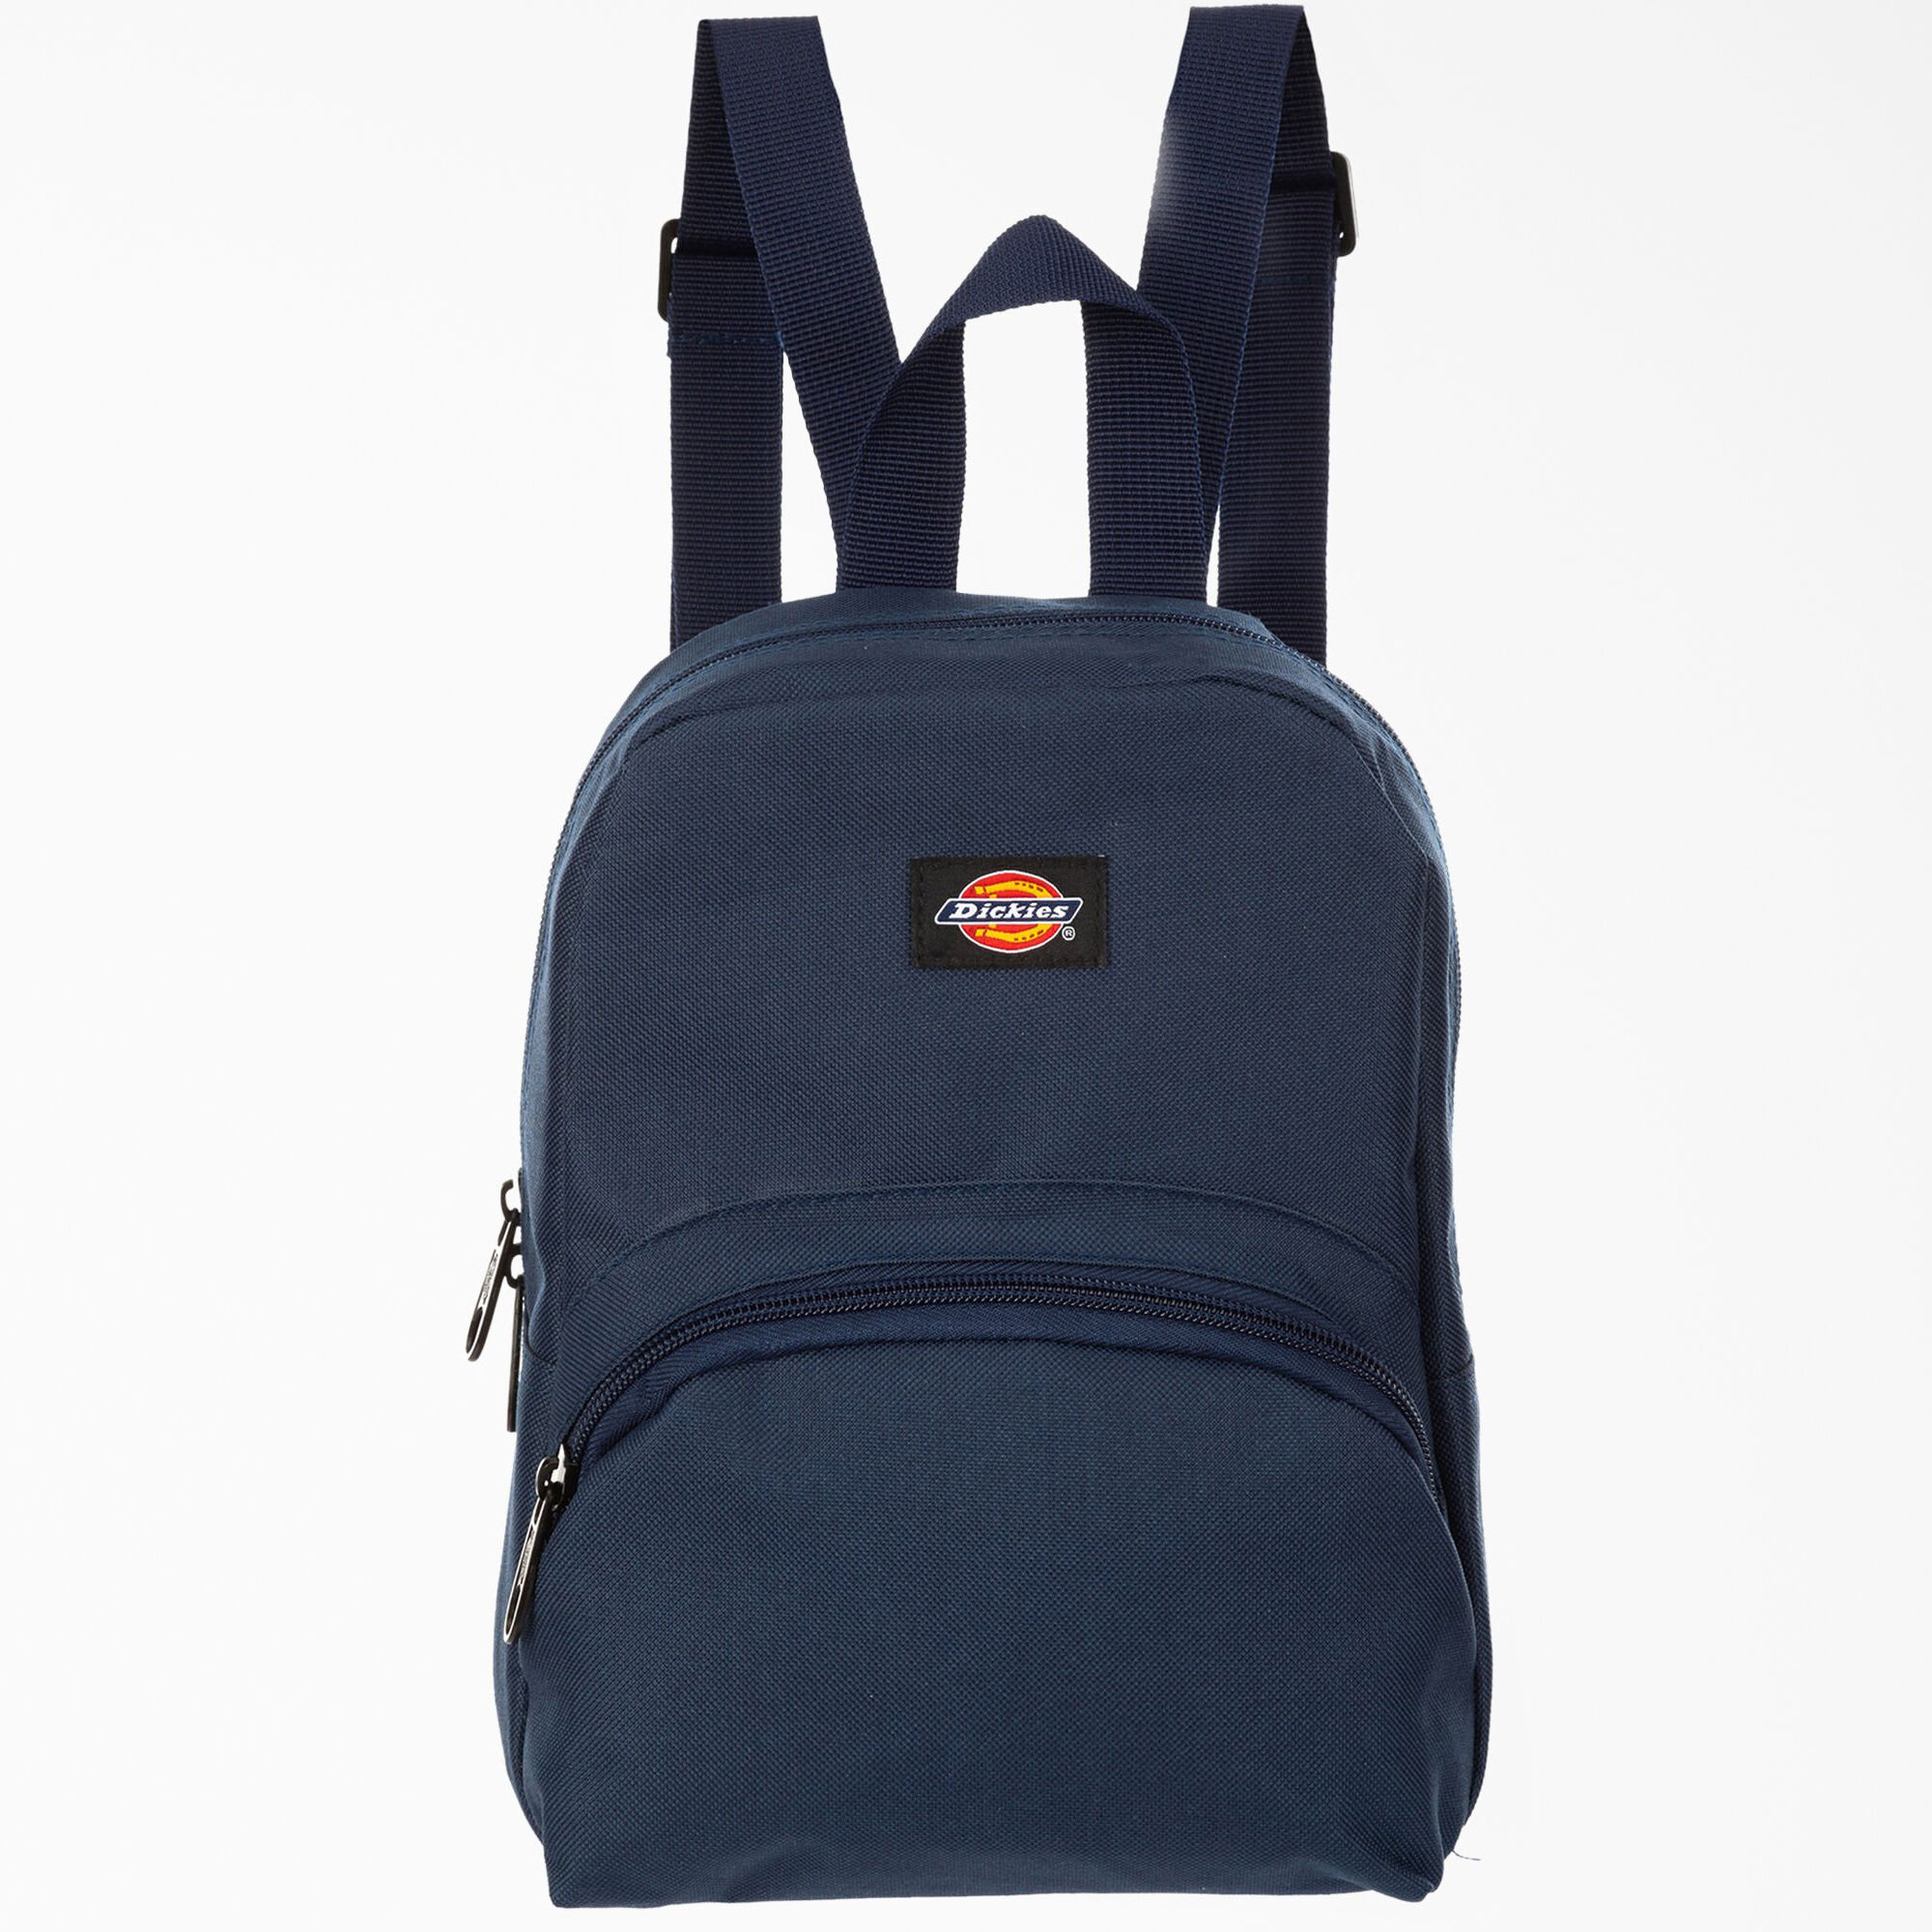 dickies small backpack